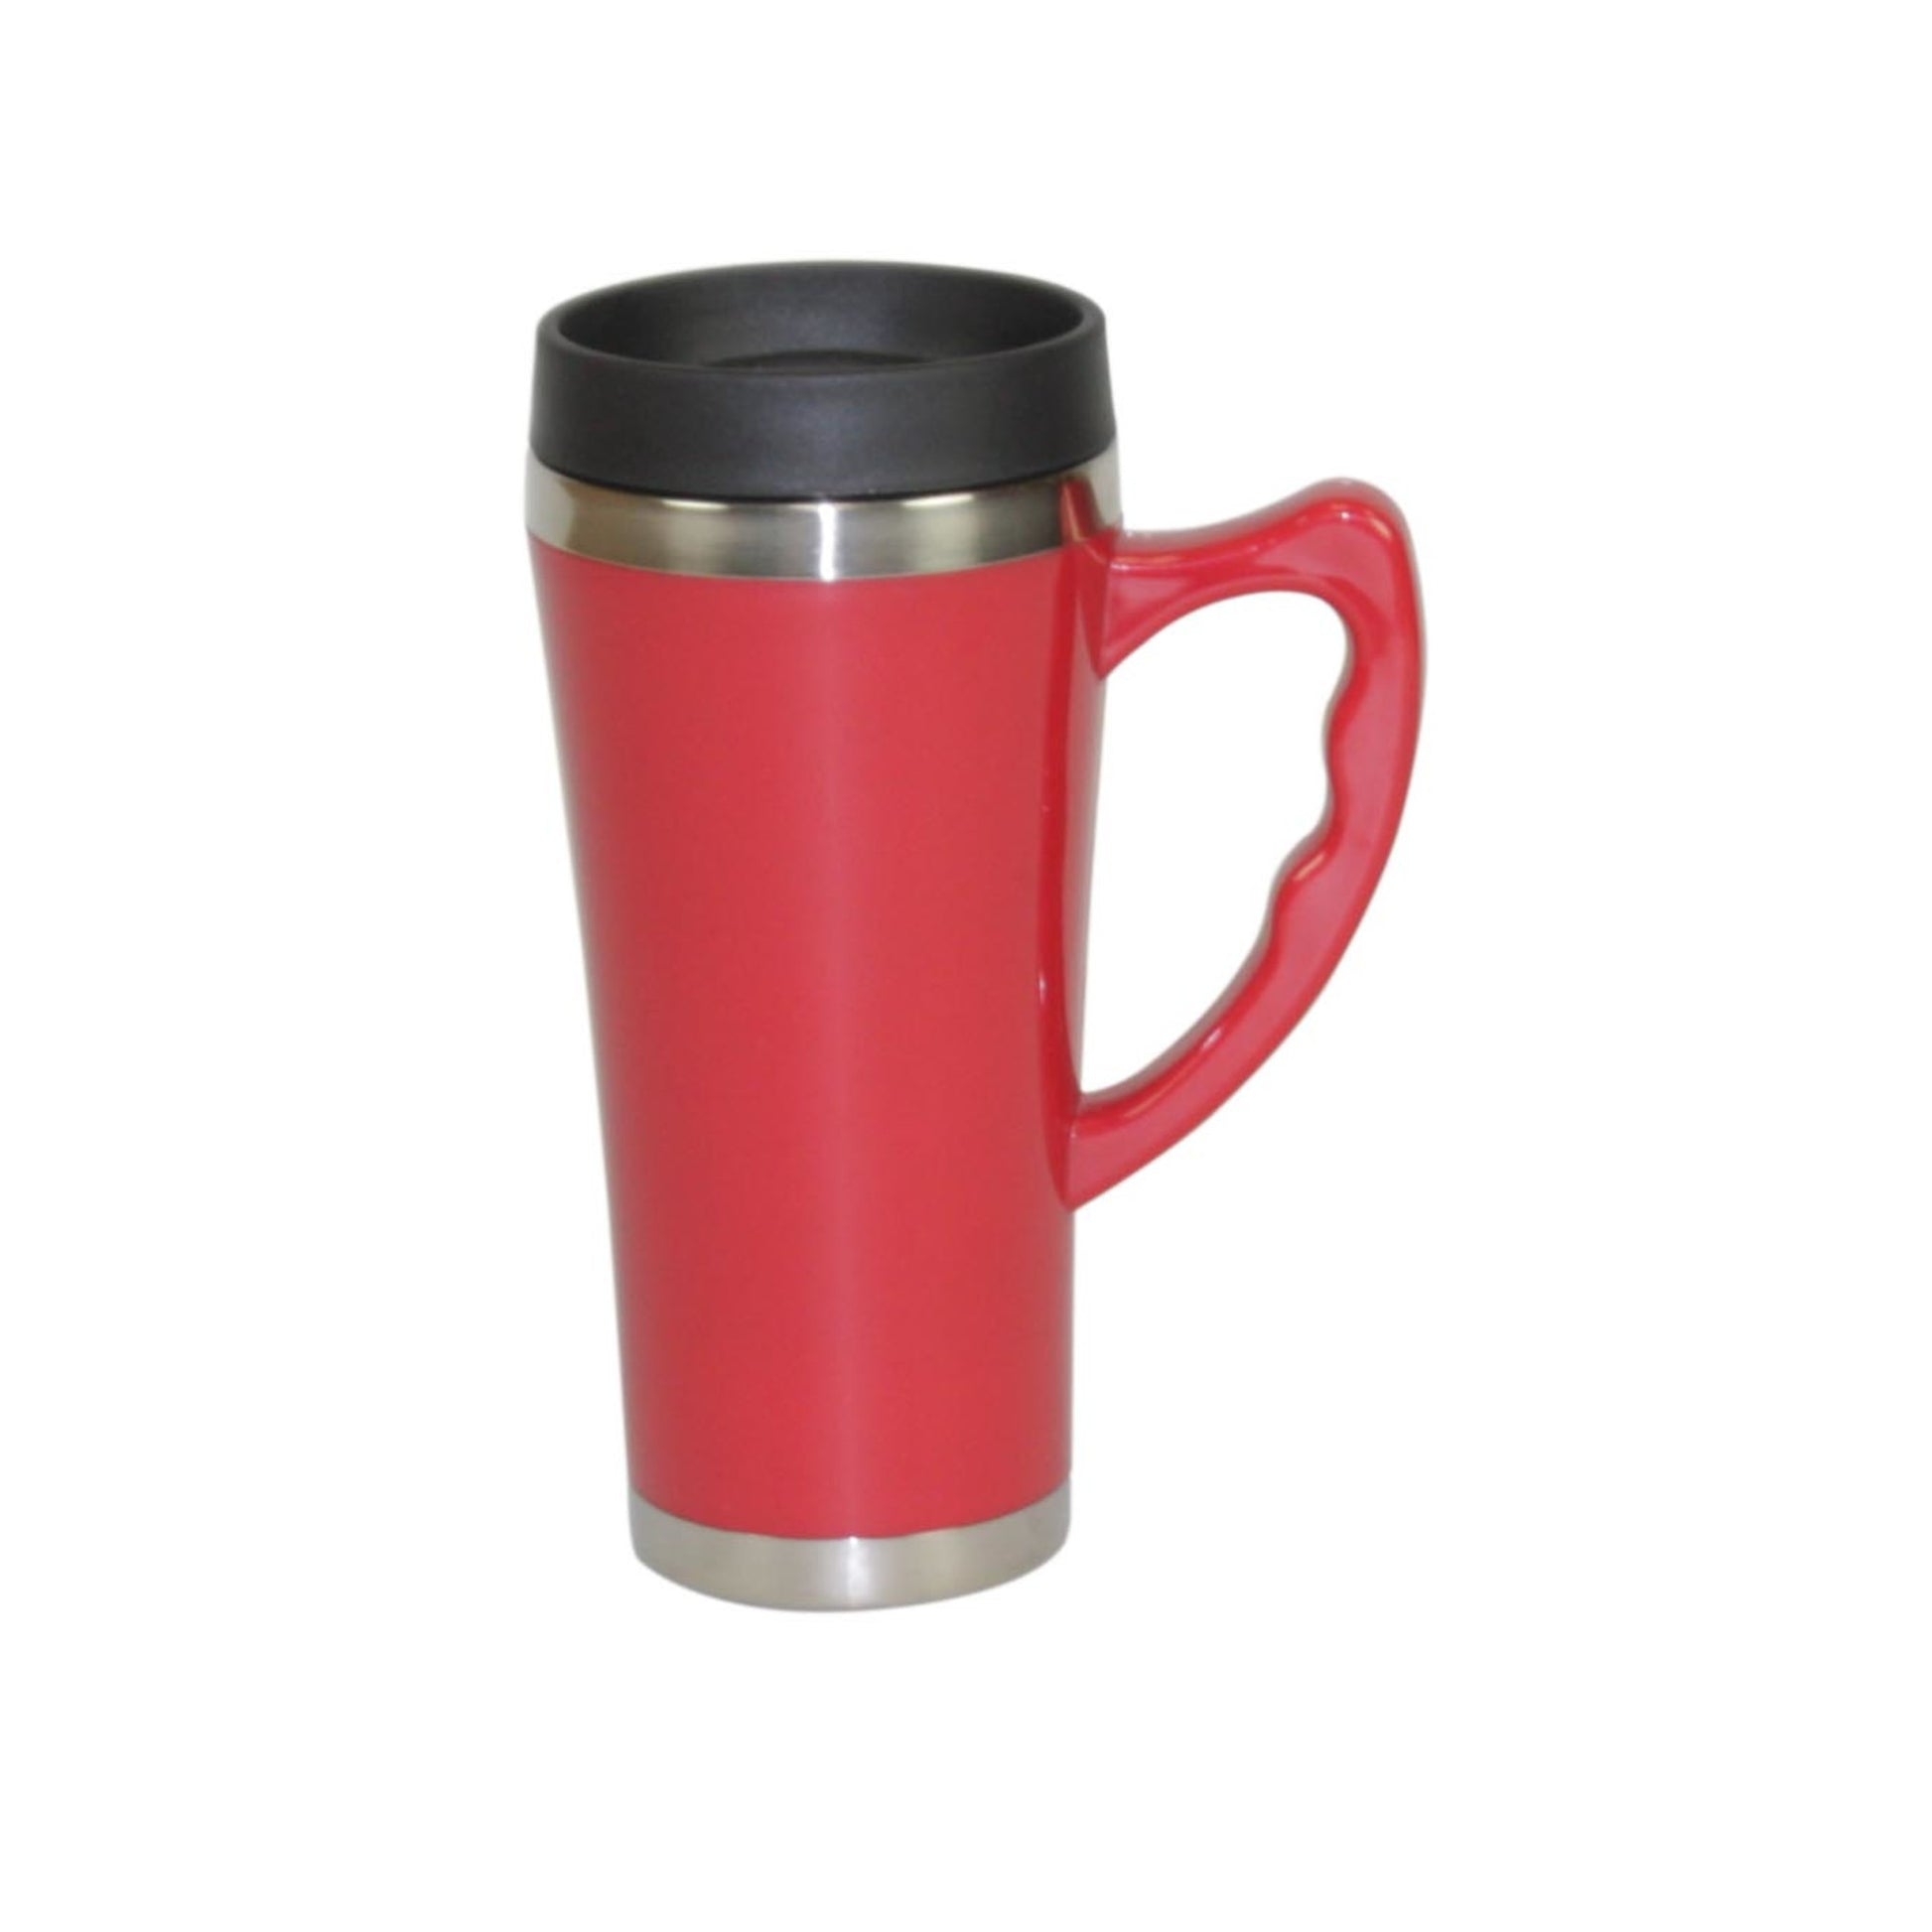 Home Basics Stainless Steel Travel Mug with Handle - Red